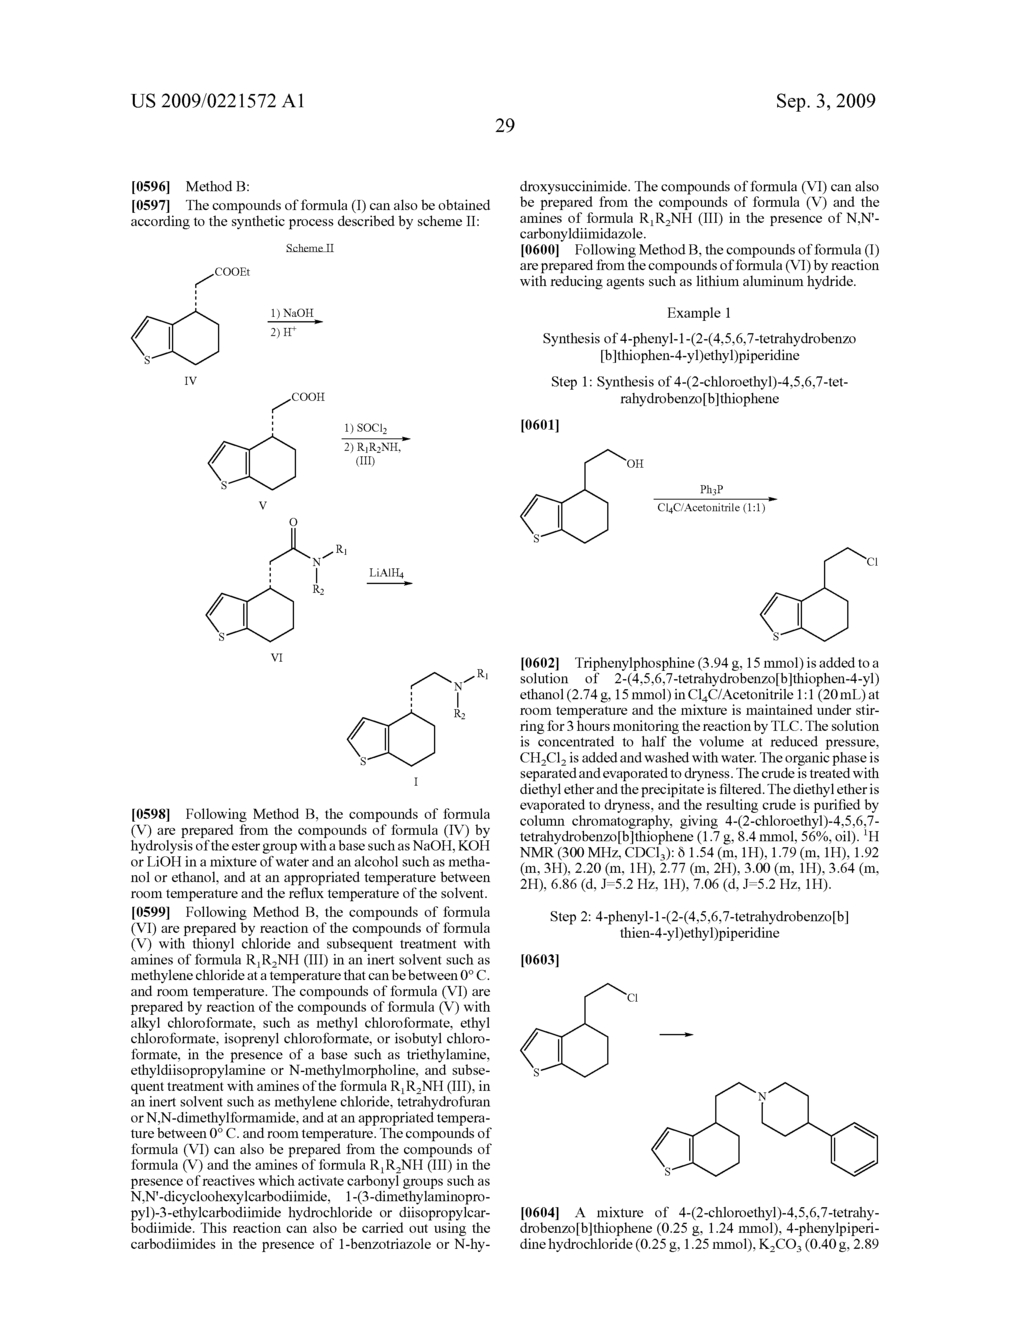 4,5,6,7-TETRAHYDROBENZO[B]THIOPHENE DERIVATIVES AND THEIR USE AS SIGMA RECEPTOR LIGANDS - diagram, schematic, and image 30